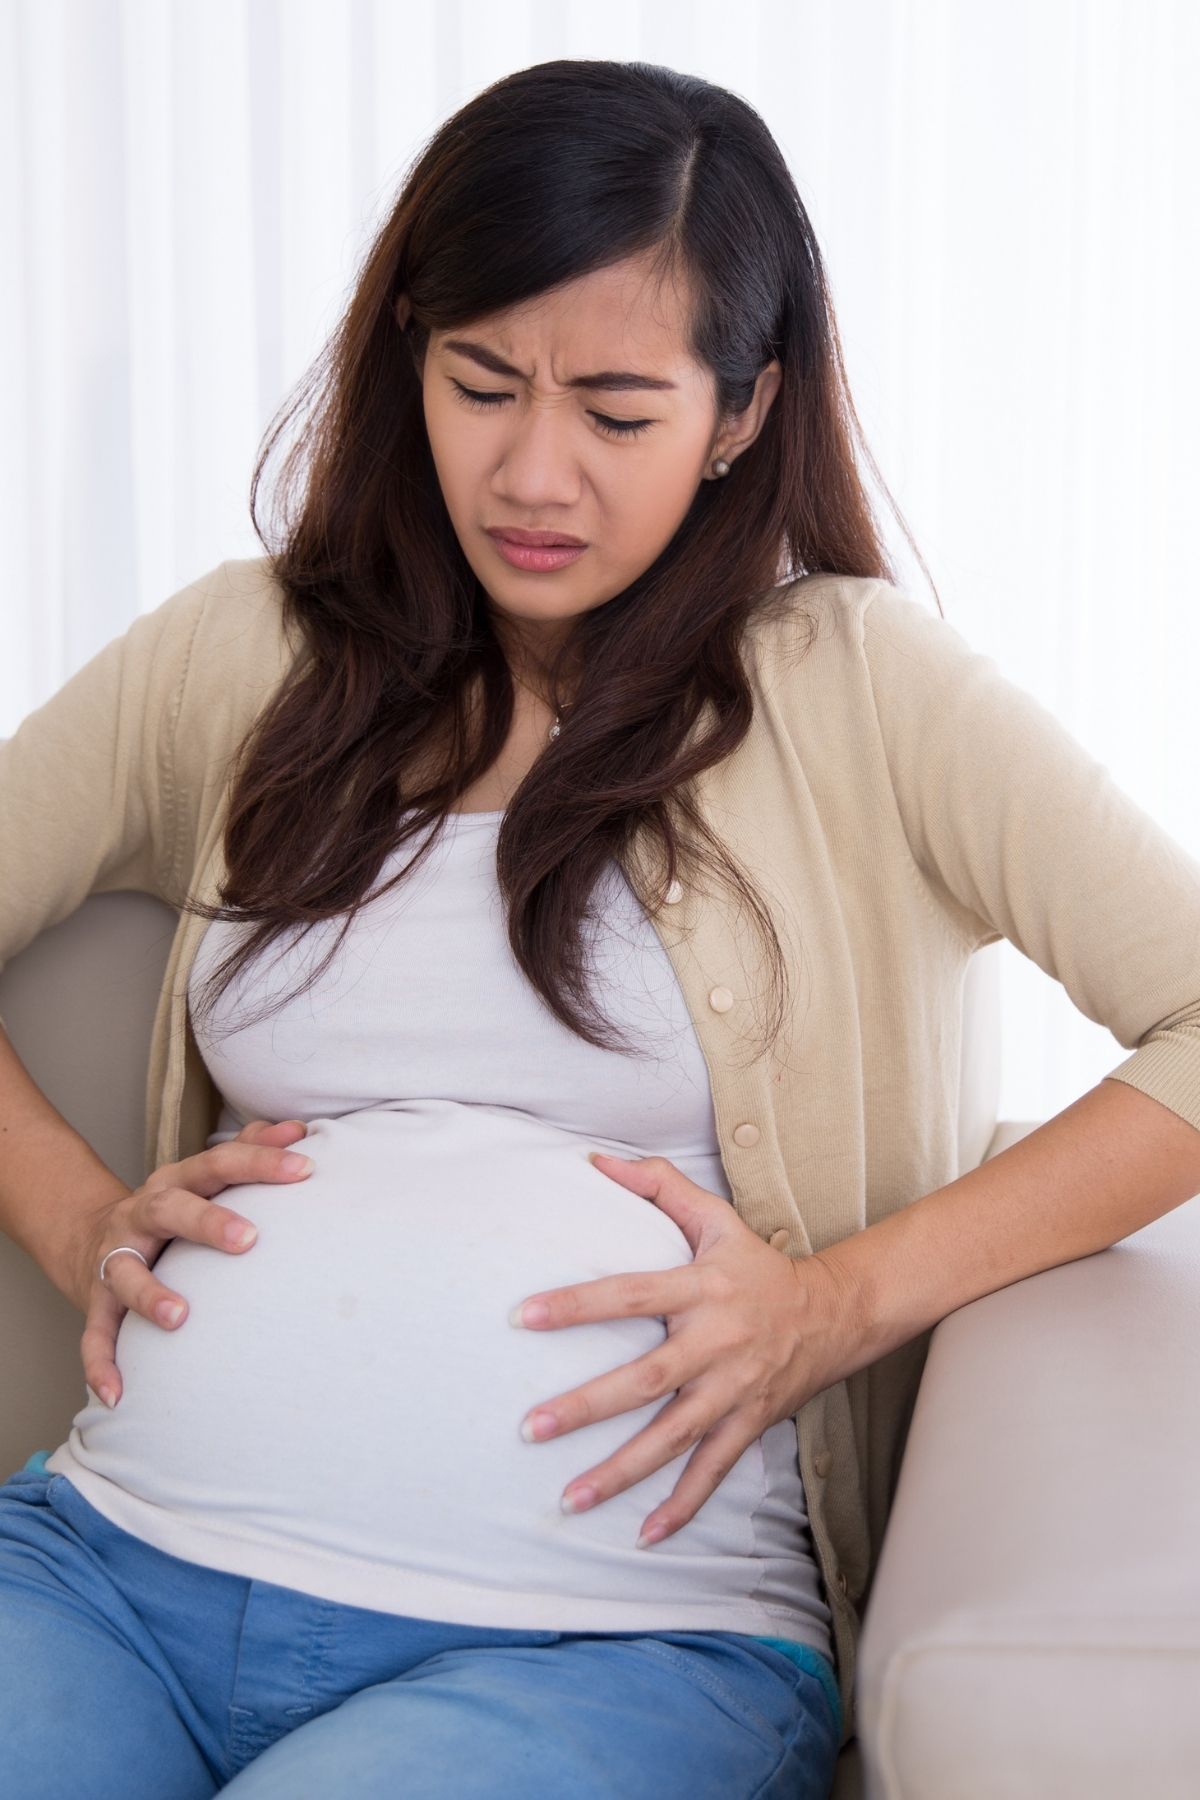 Woman sitting on couch holds her pregnant belly while wincing from stomach pain.